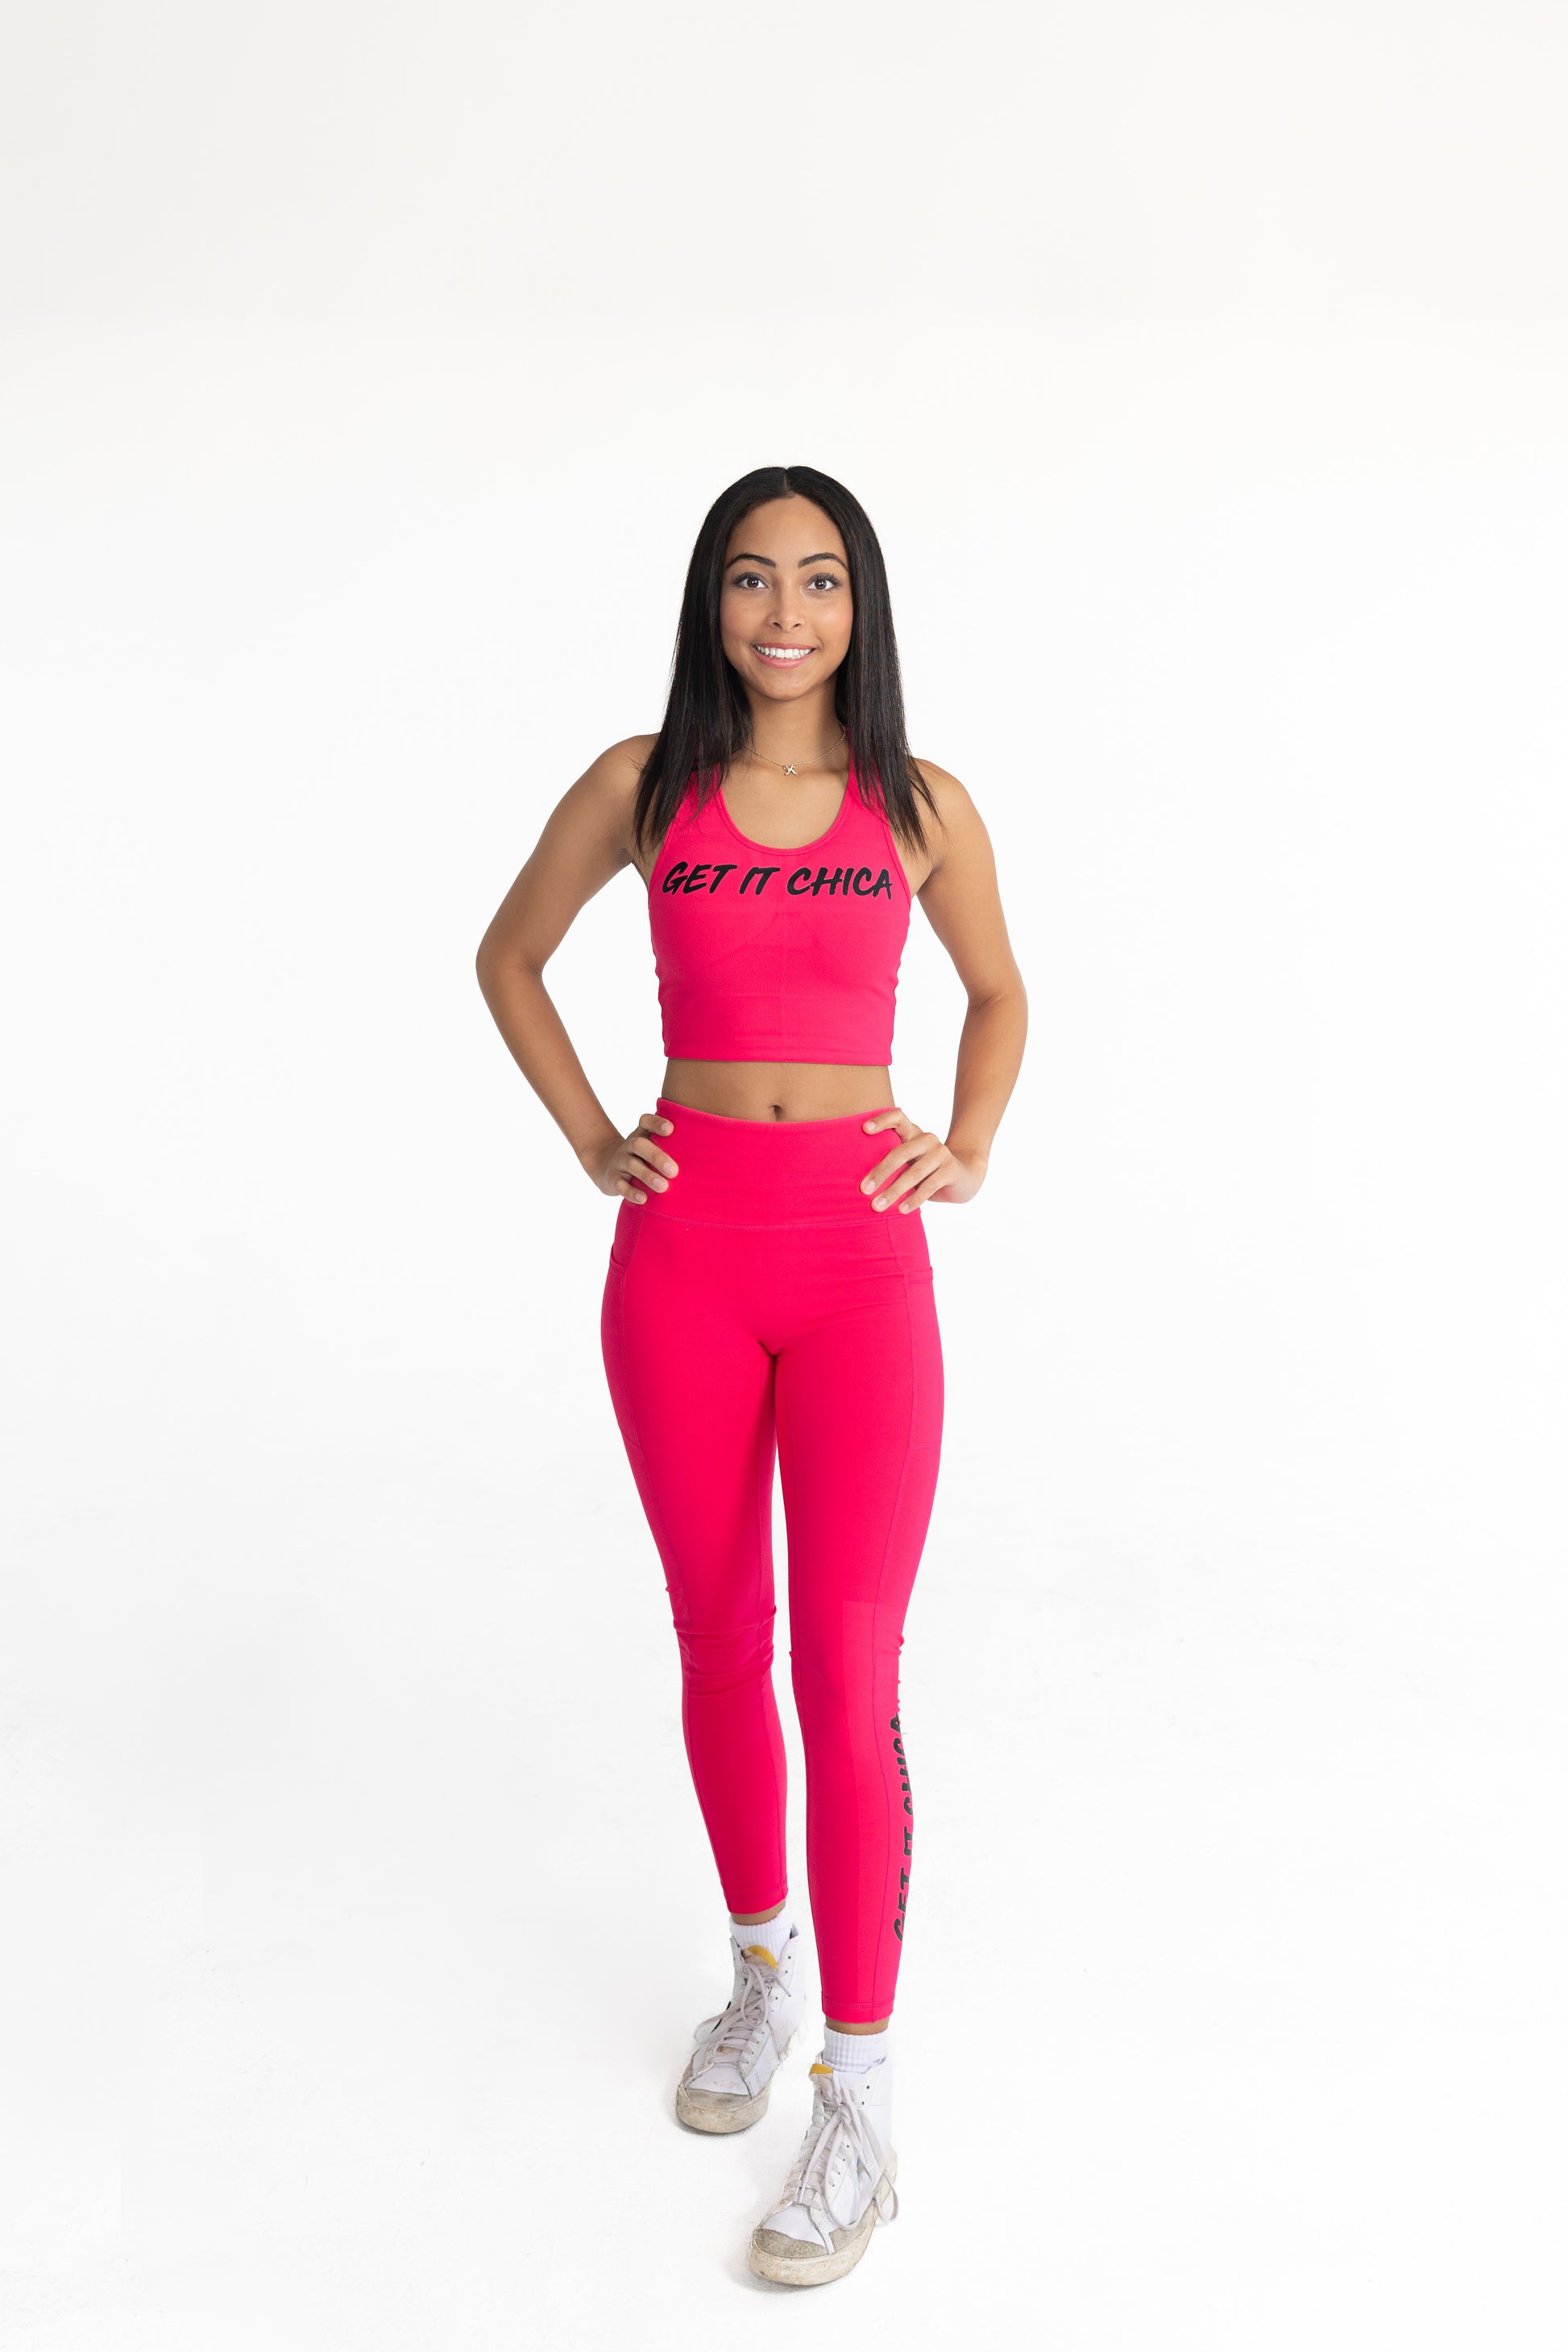 get it chica workout gym top chica beauty pink